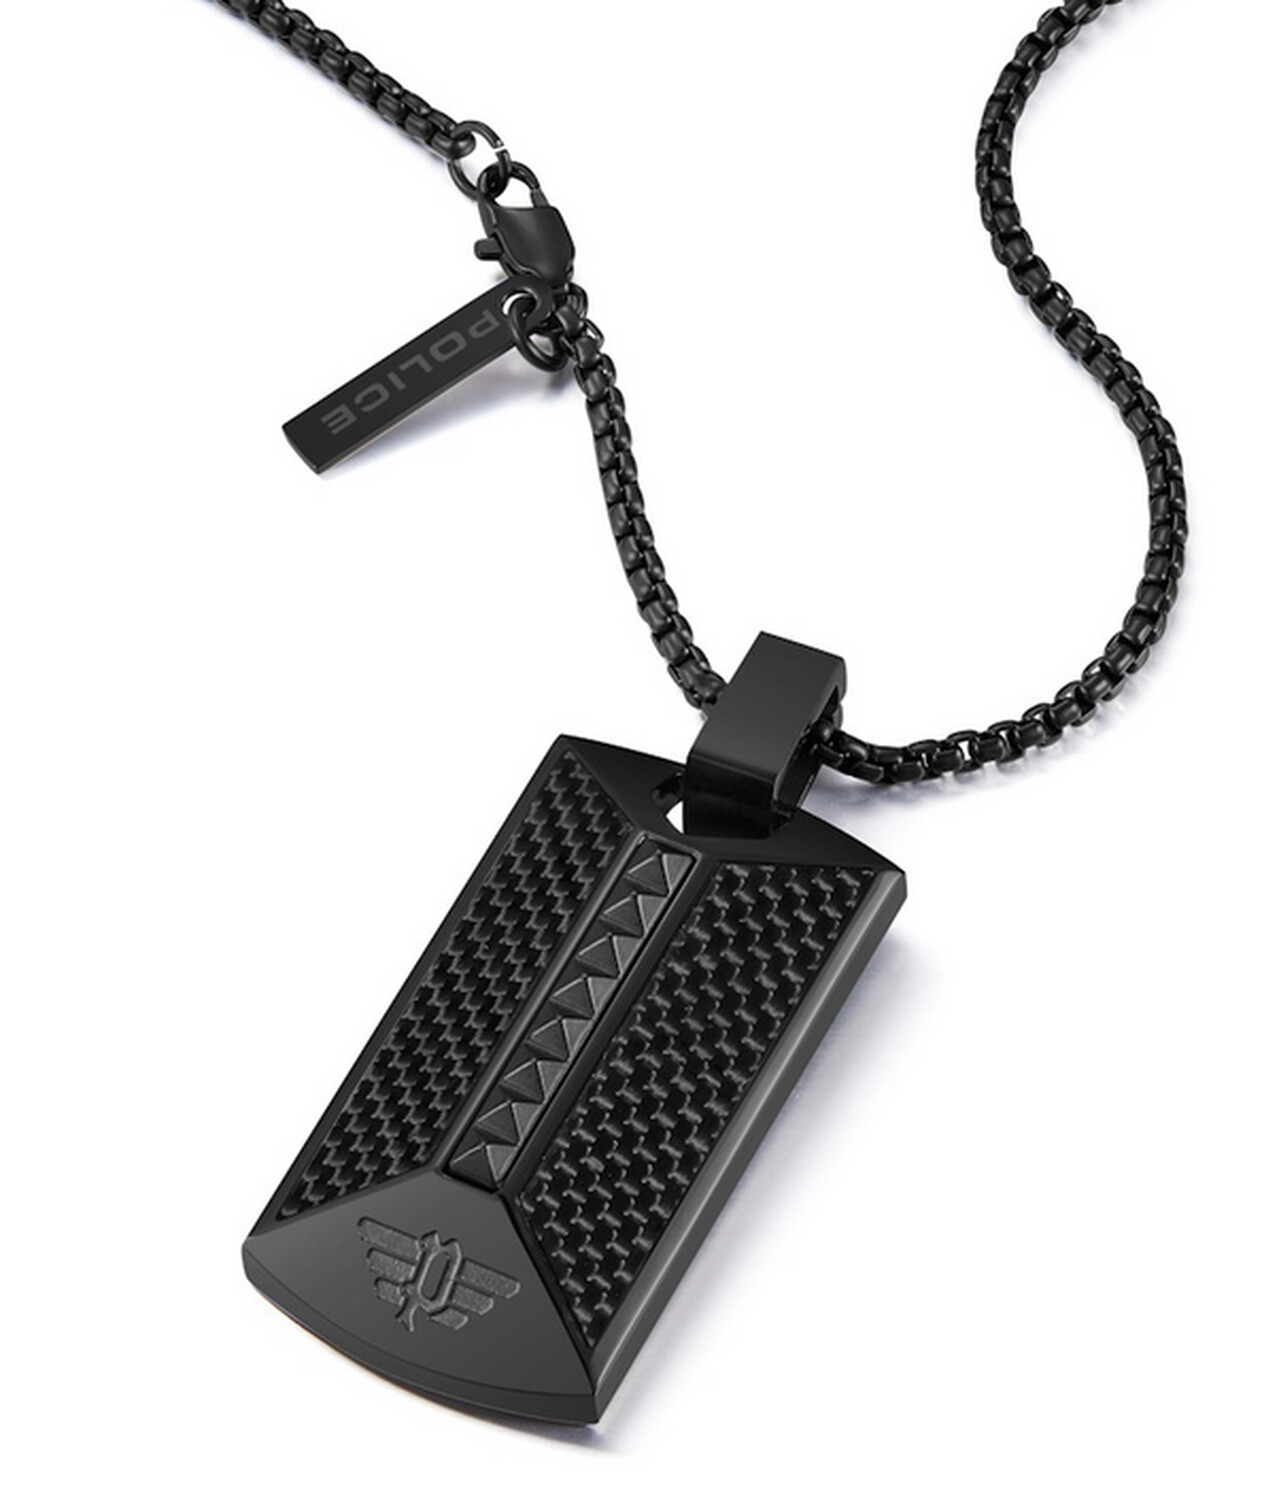 Geometric Metal Necklace By Police For Men